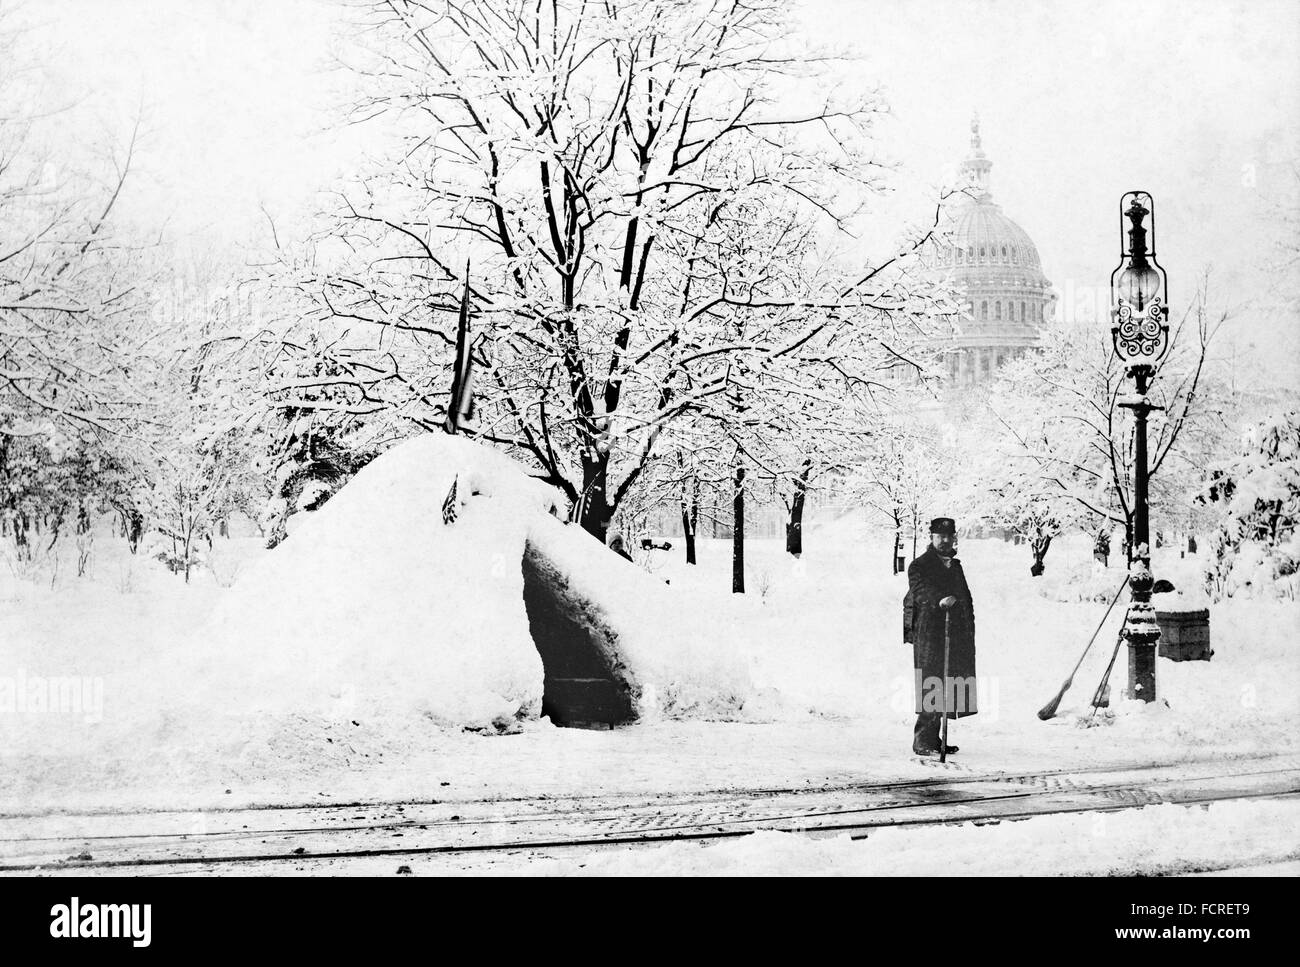 Great Blizzard of 1888. Washington DC during the Great Blizzard of March 1888 Stock Photo